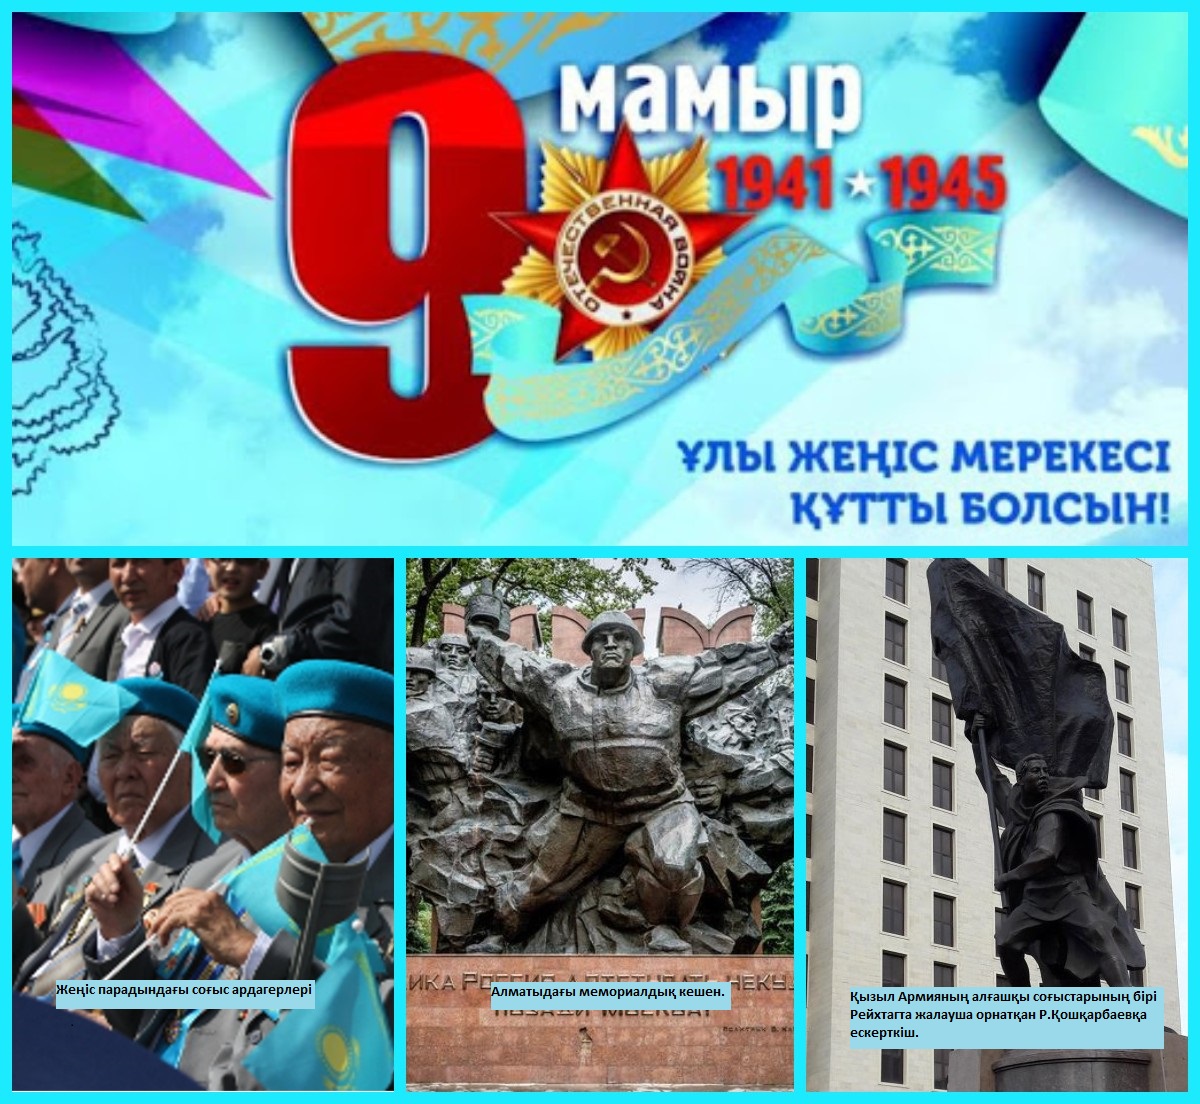 Kazakhstan's contribution to victory in the Great Patriotic War